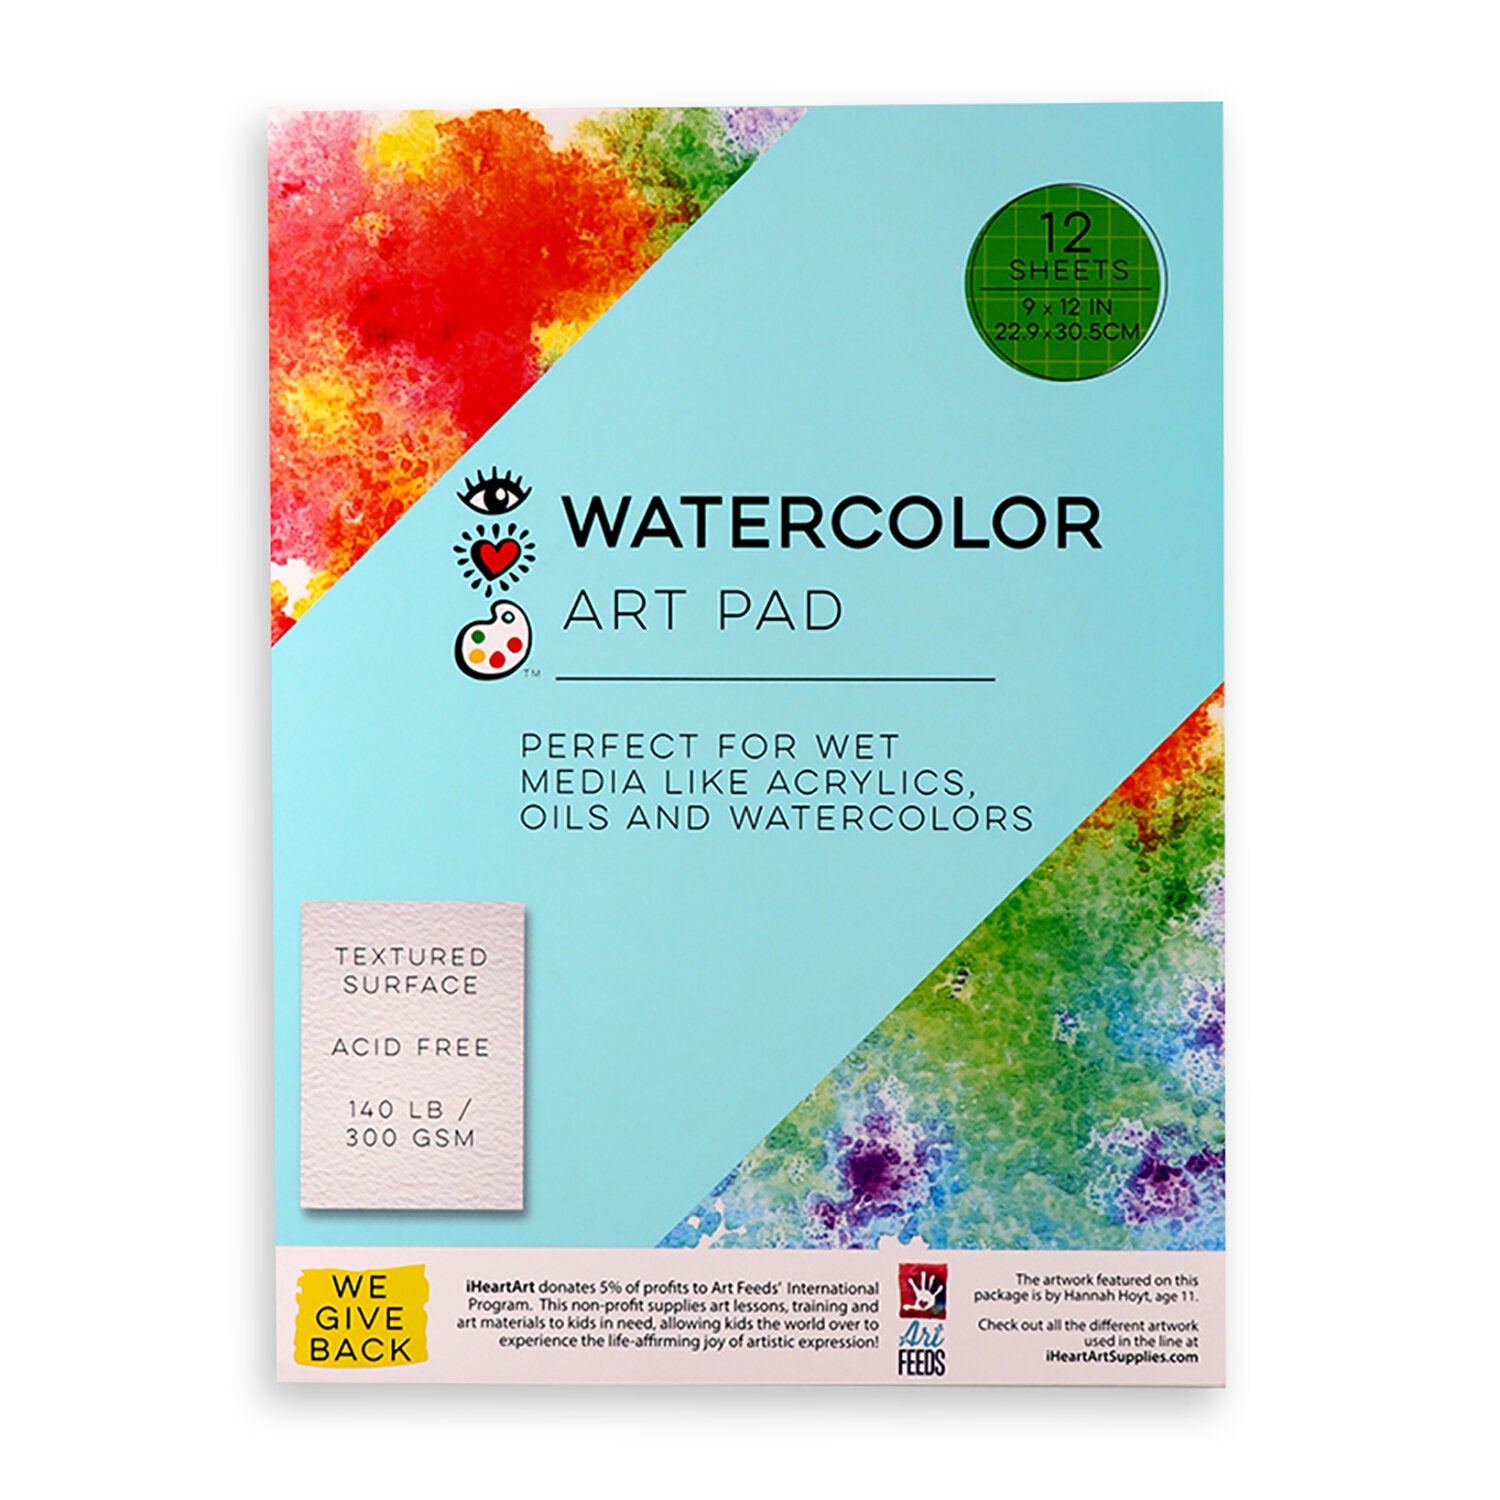 Kids Art Supplies - What to Buy at Every Age